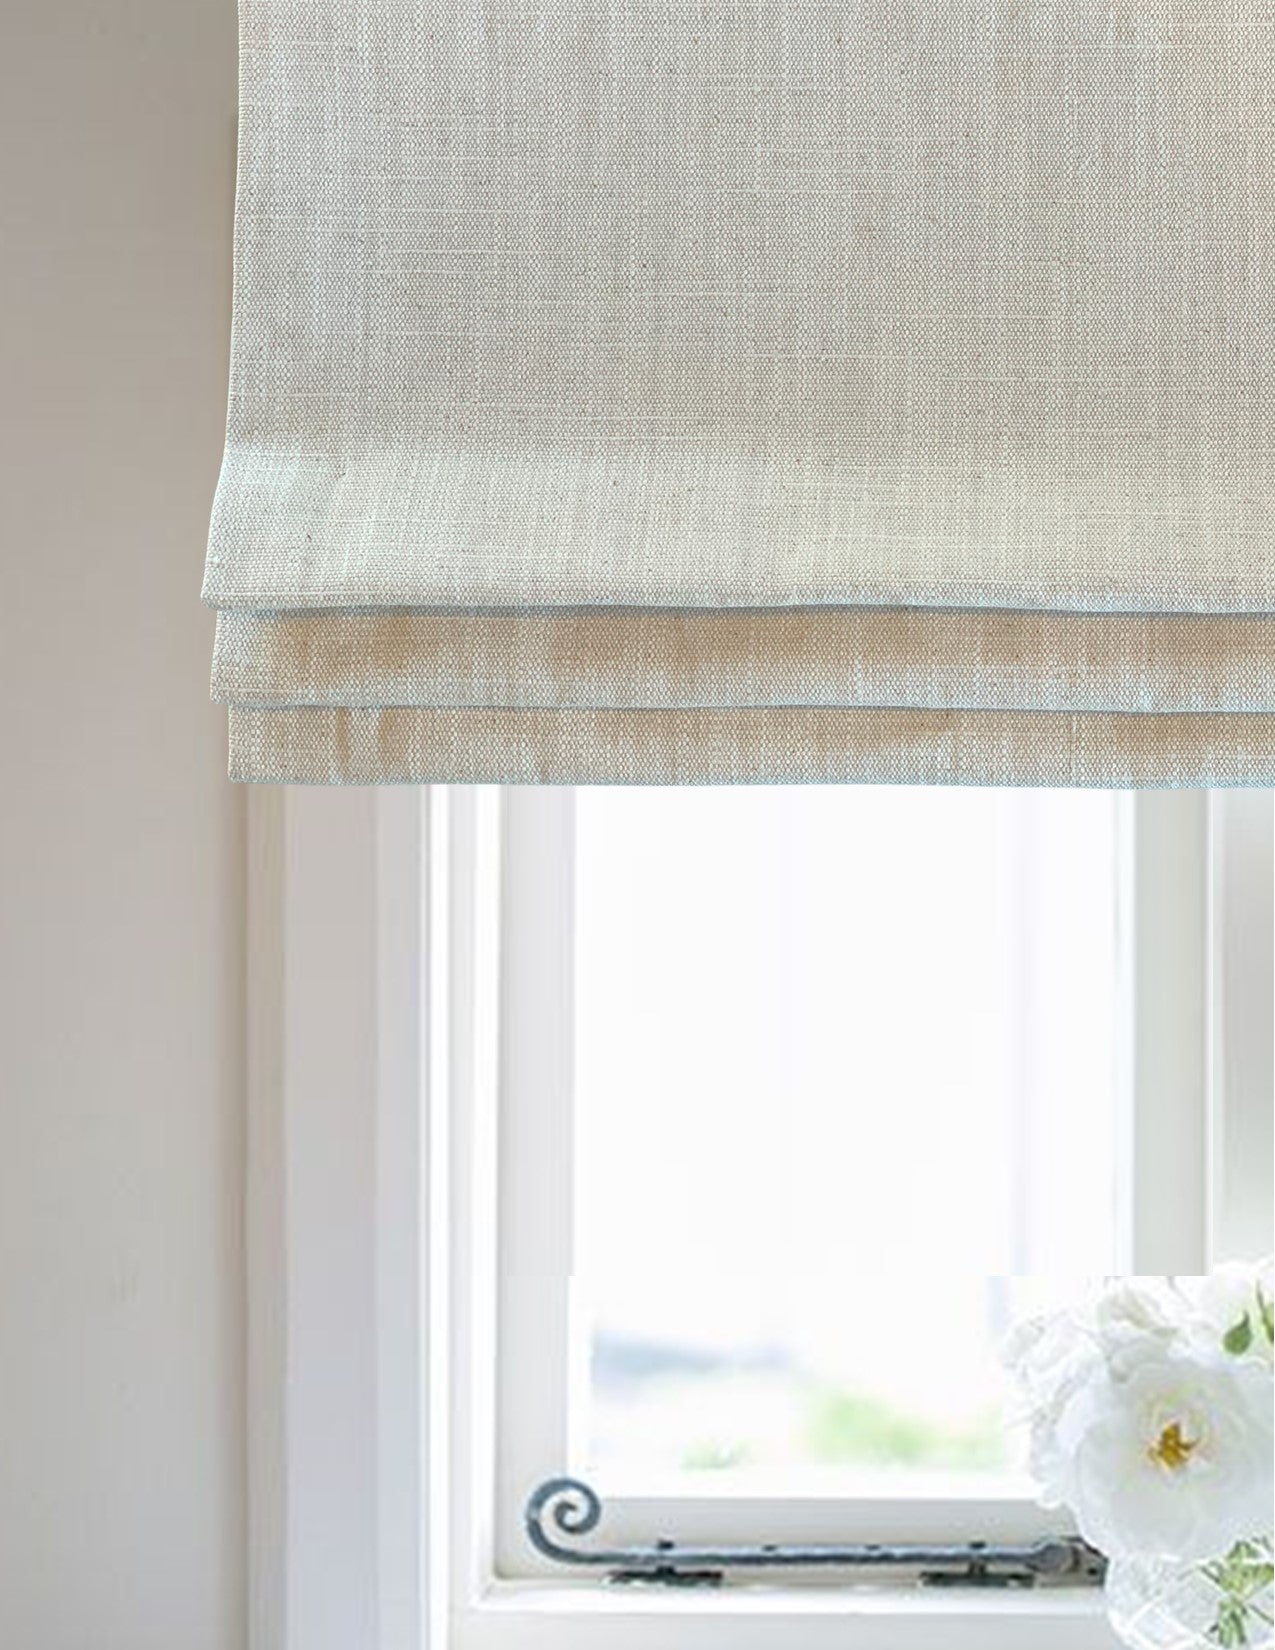 Faux Roman Shade Valance in Premium Natural or White Cotton Linen, Custom Made, Fully Lined